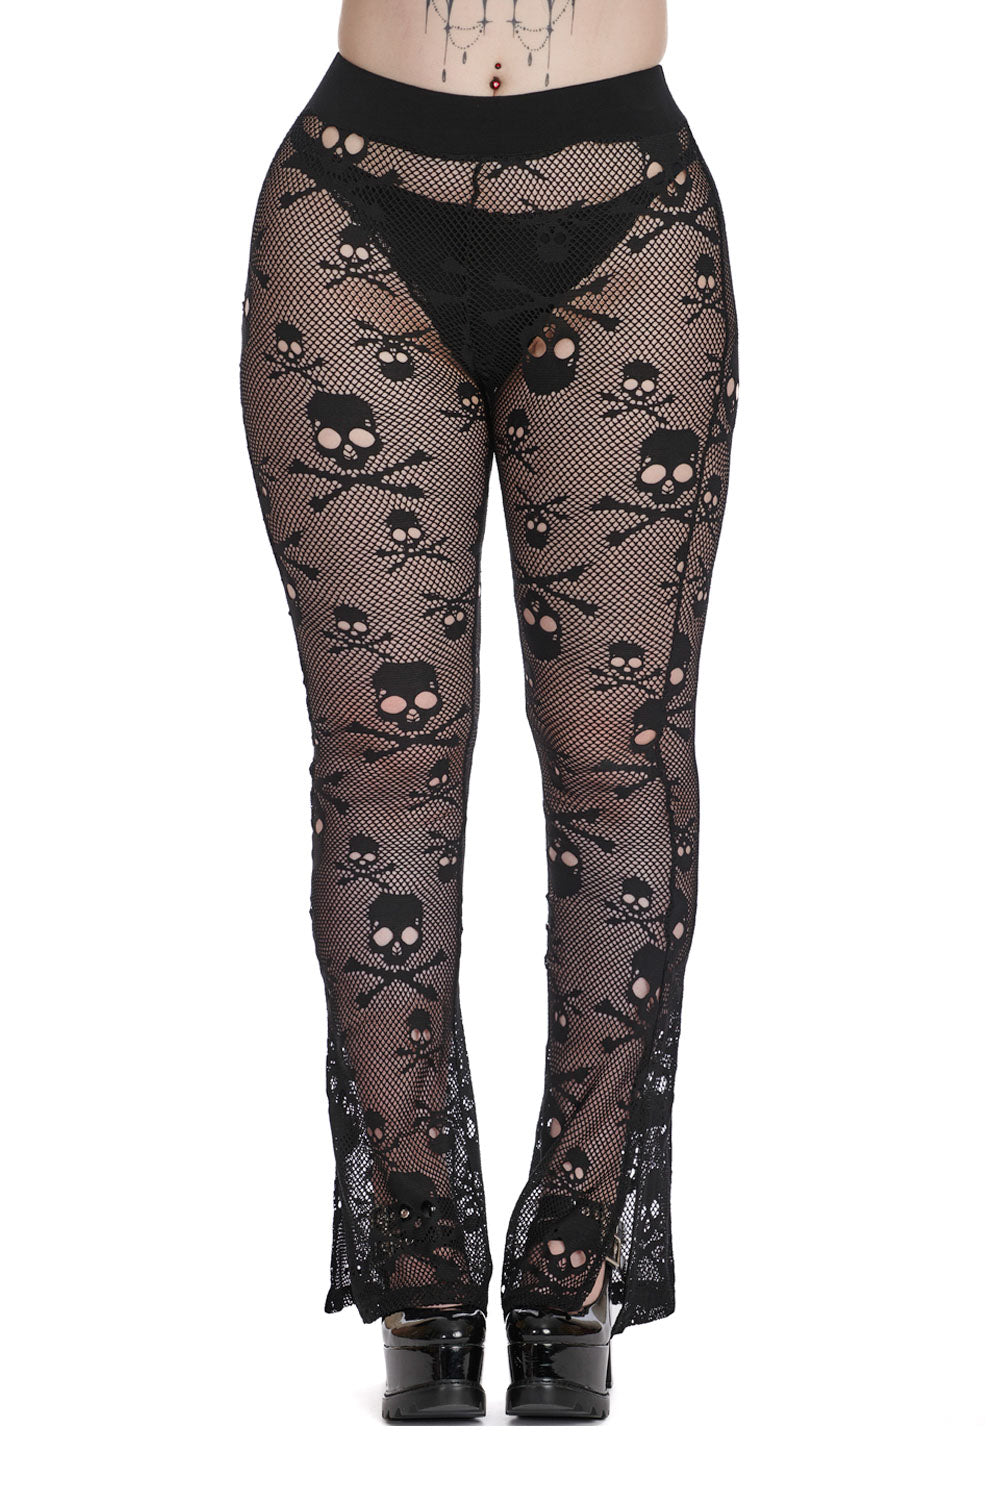 Banned Alternative GODDESS GETUP LACE TROUSERS